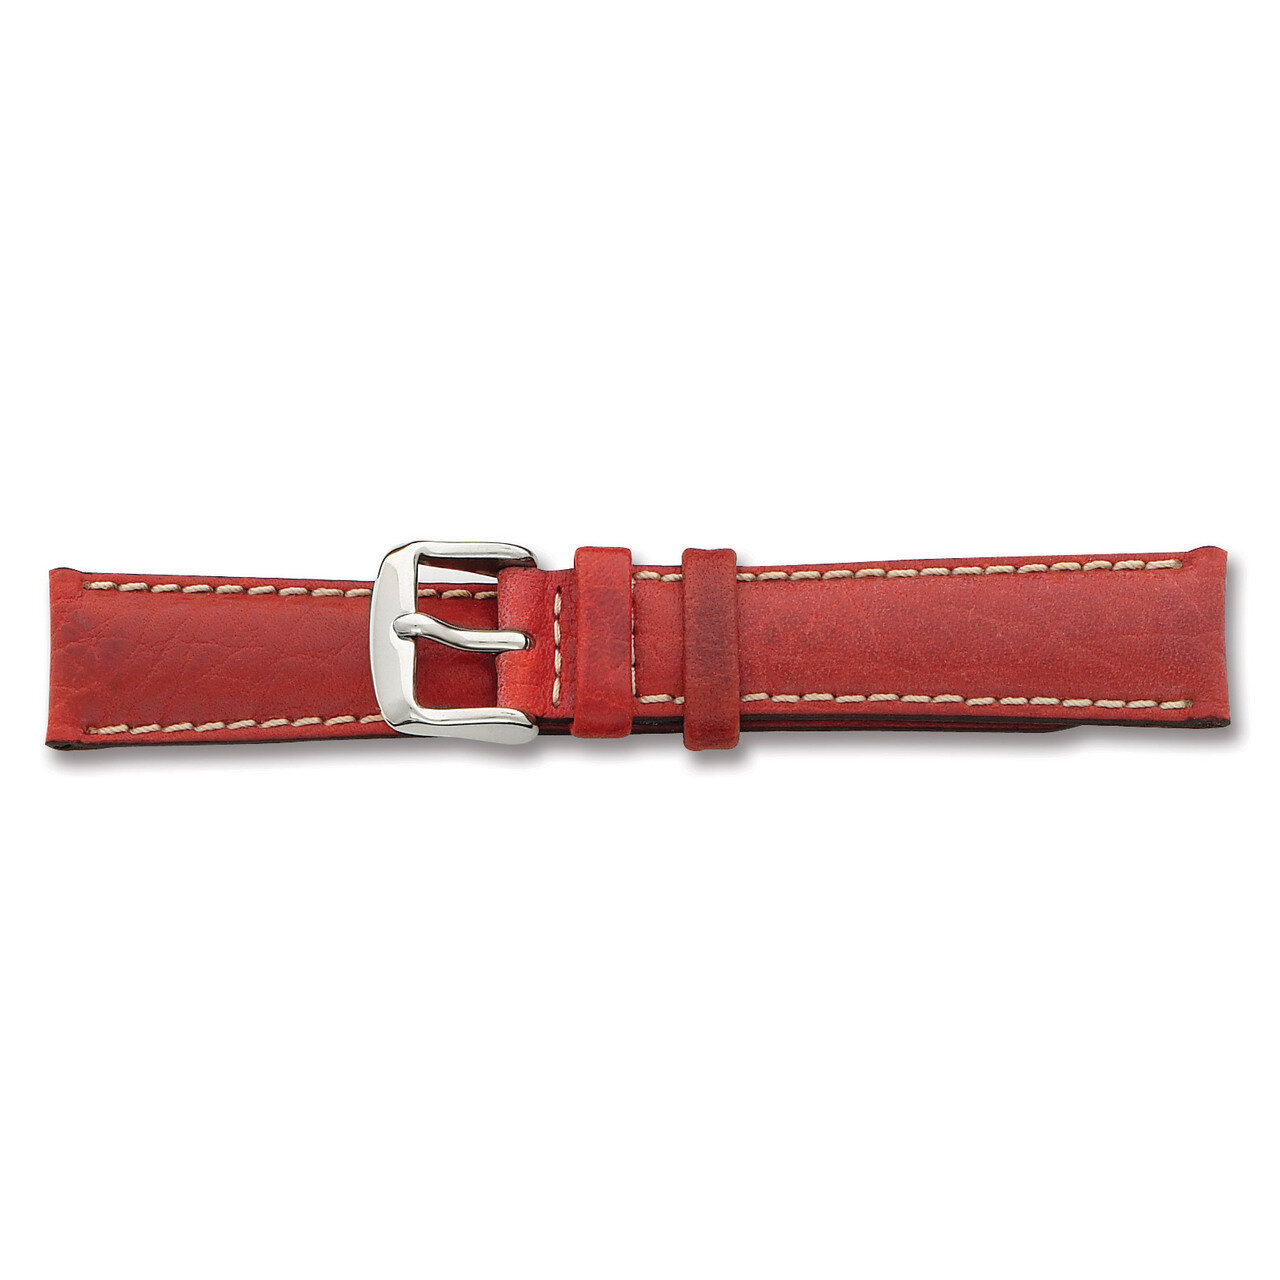 16mm Red Sport Leather White Stitch Watch Band 7.5 Inch Silver-tone Buckle BA138-16